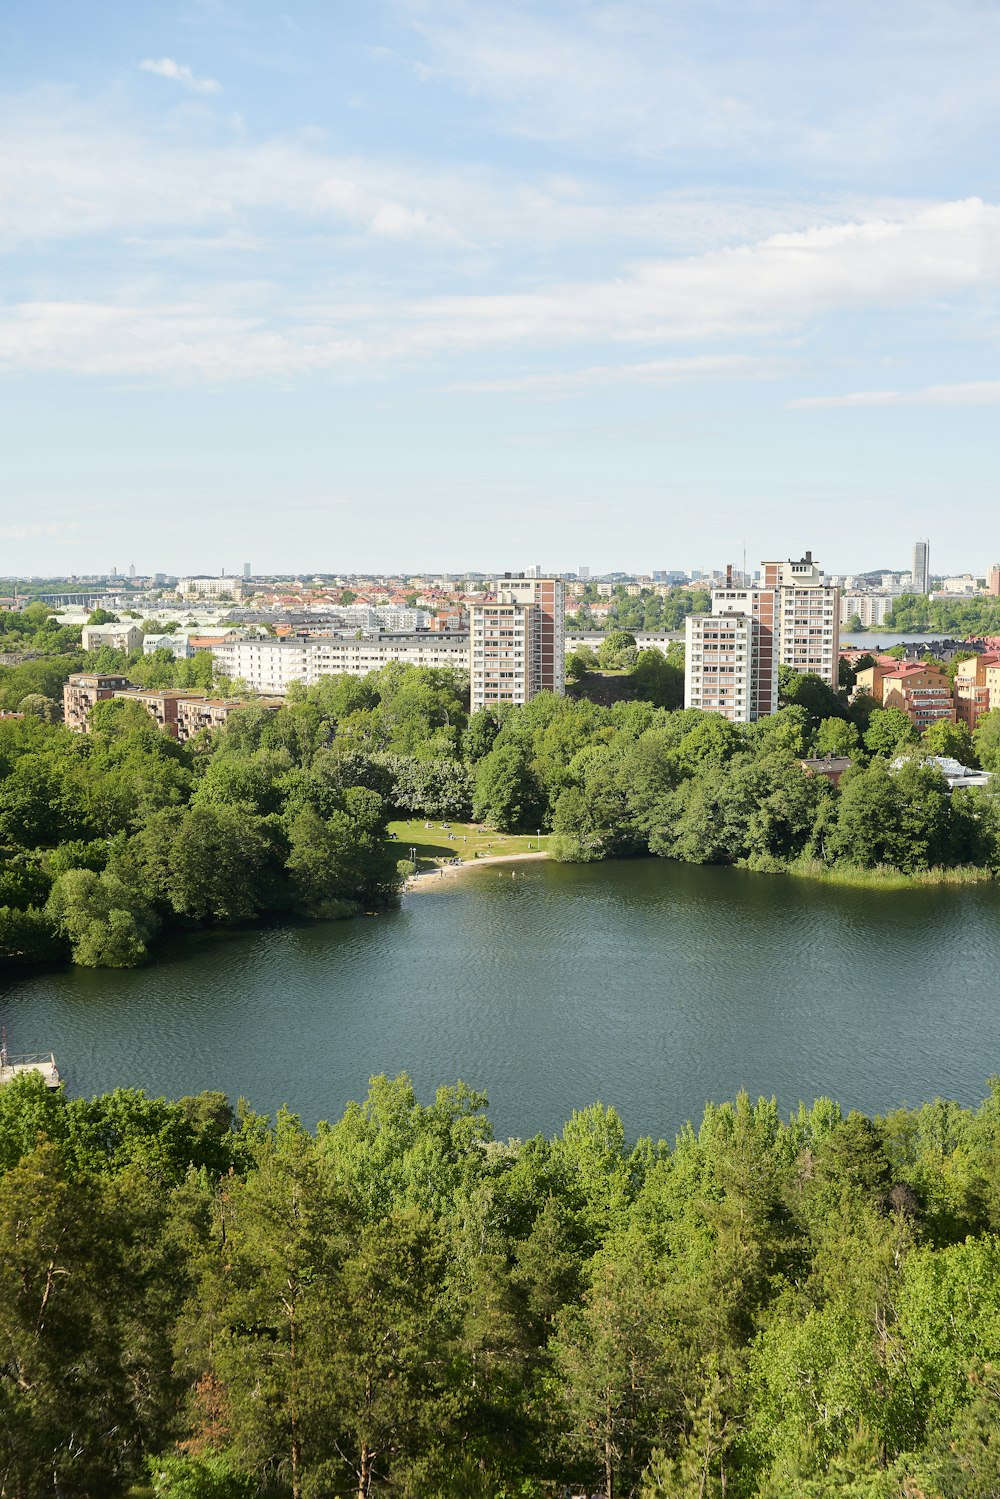 a large lake surrounded by trees and buildings